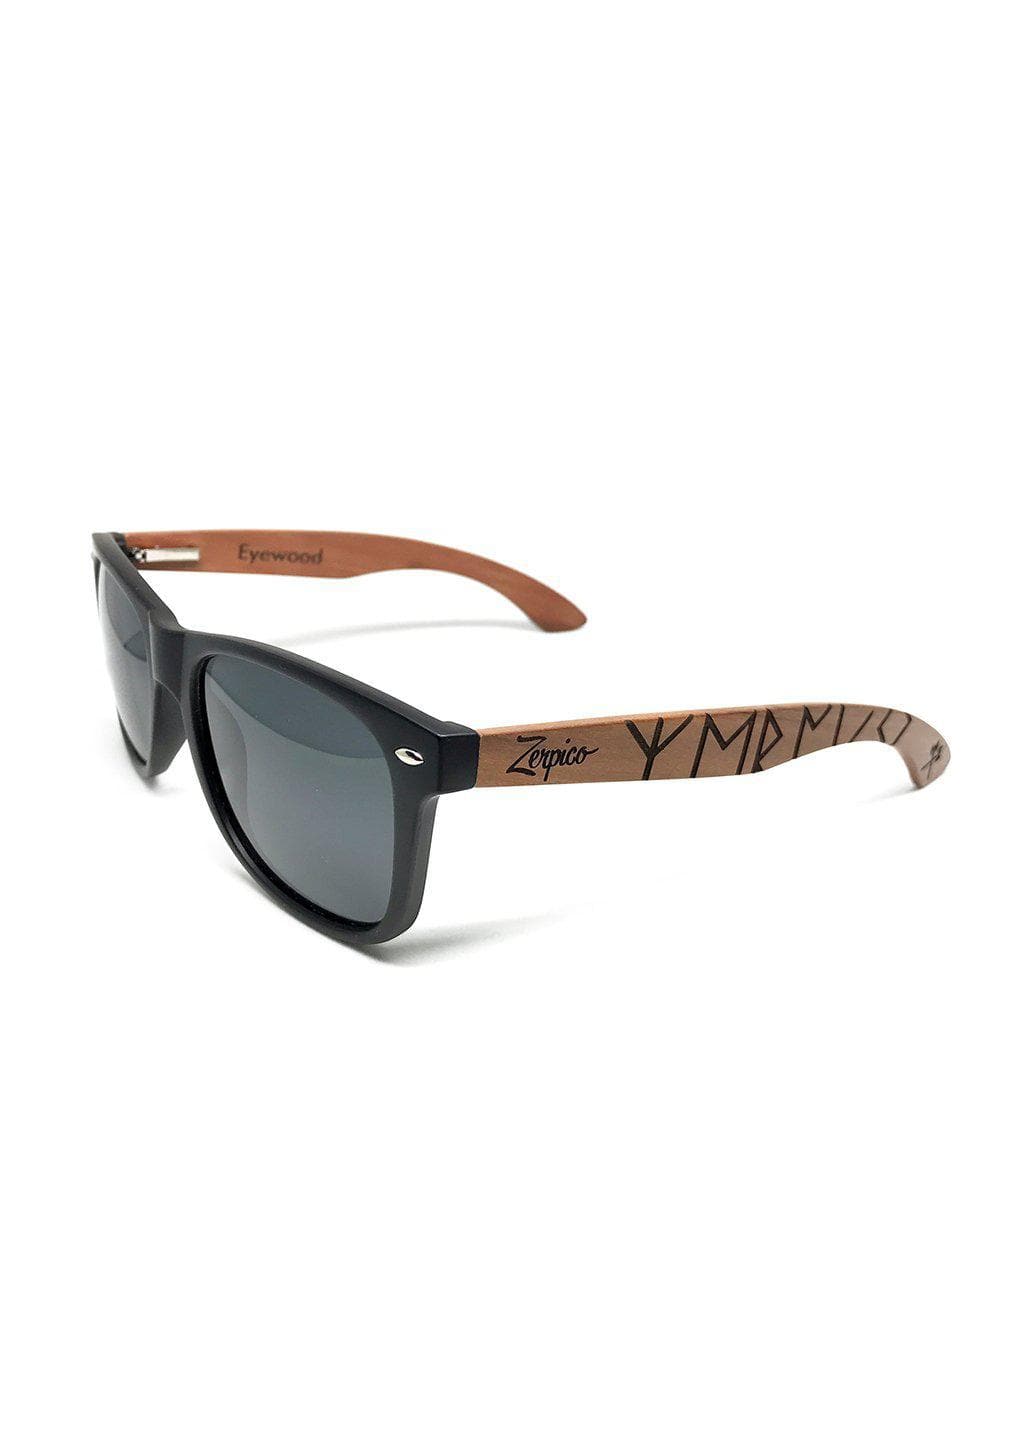 This is our special edition sunglasses Viking runes. Studio Shoot.